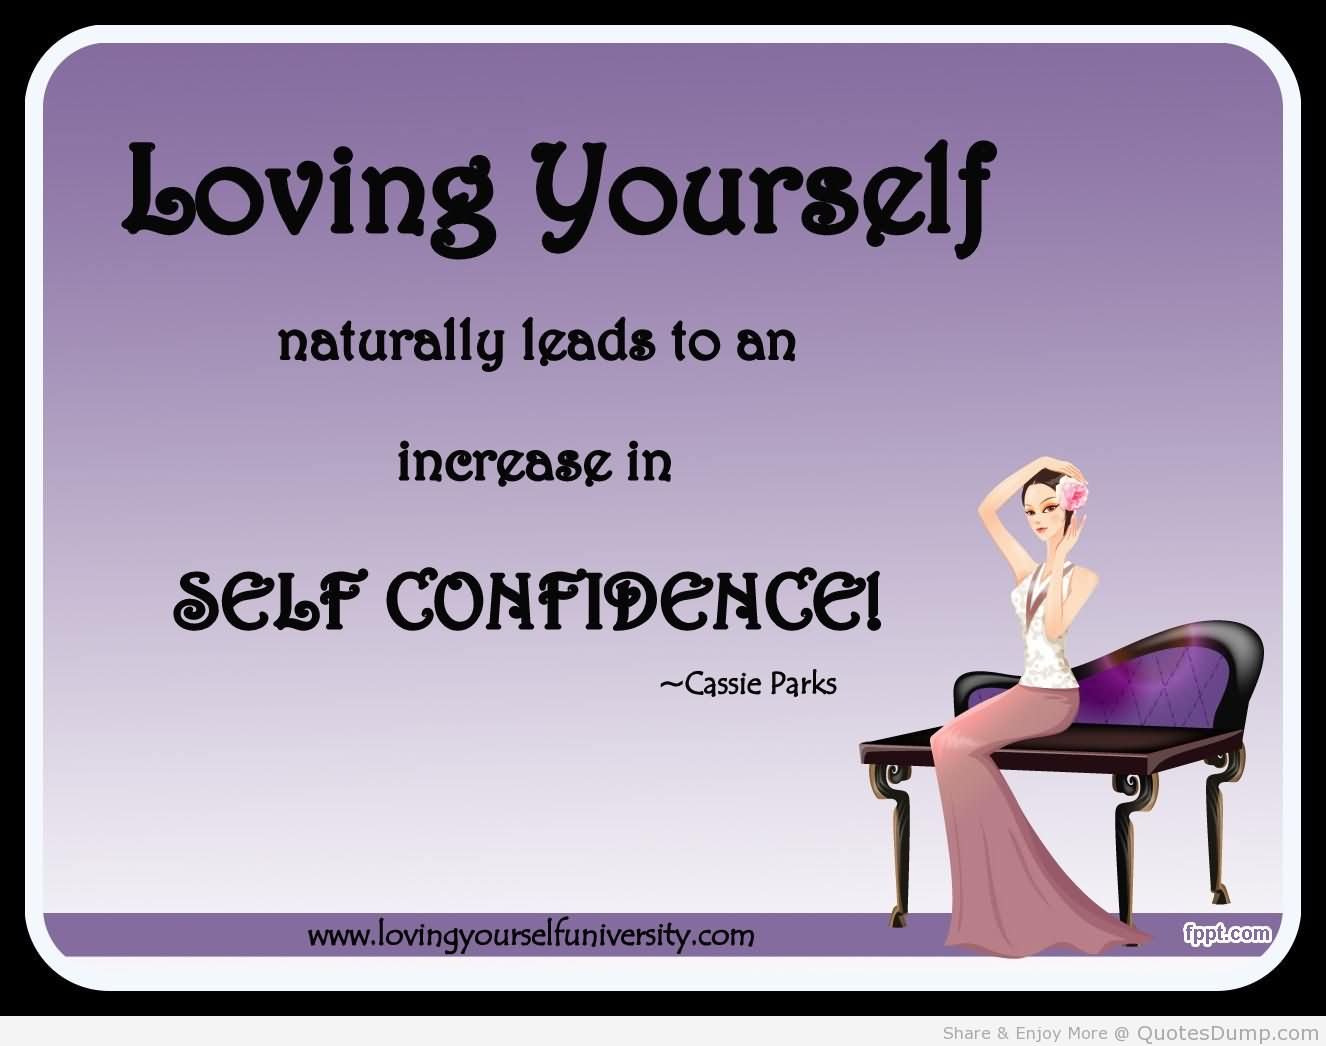 Loving yourself naturally leads to an increase in self confidence.